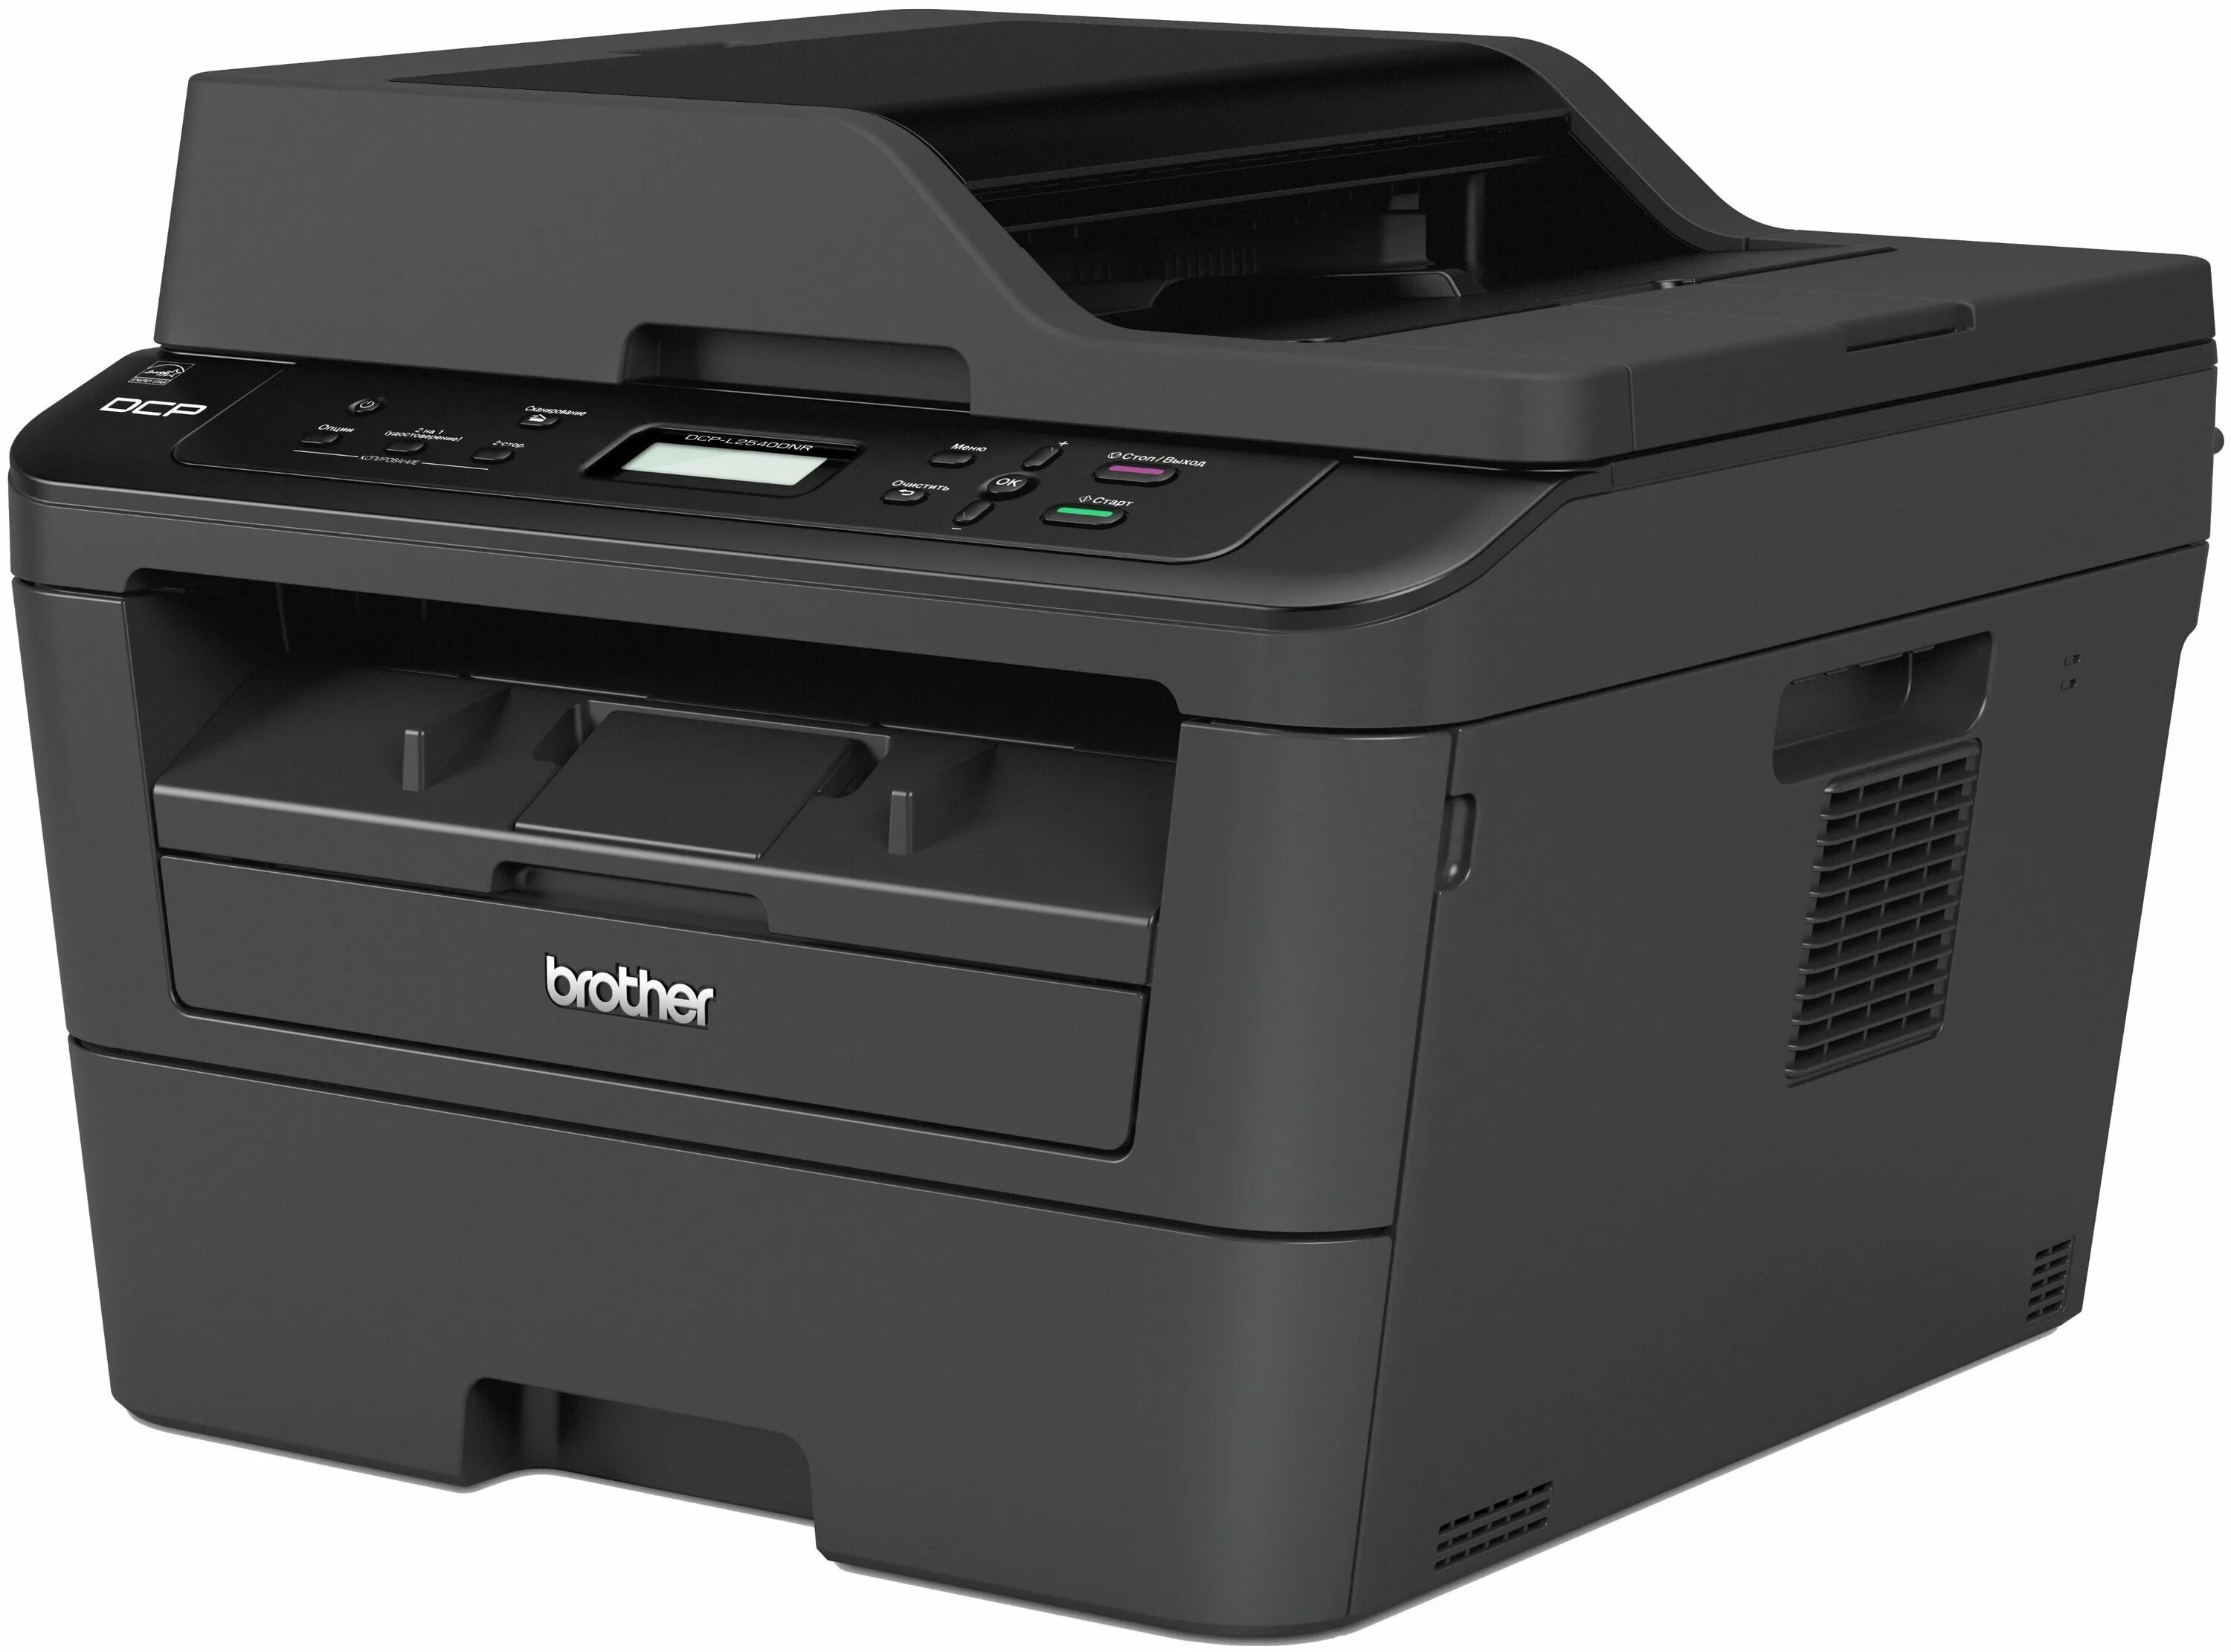 Brother DCP-l2520dwr. МФУ brother DCP-l2500dr. МФУ лазерное brother DCP-l2520dwr. МФУ brother MFC-l2720dwr.